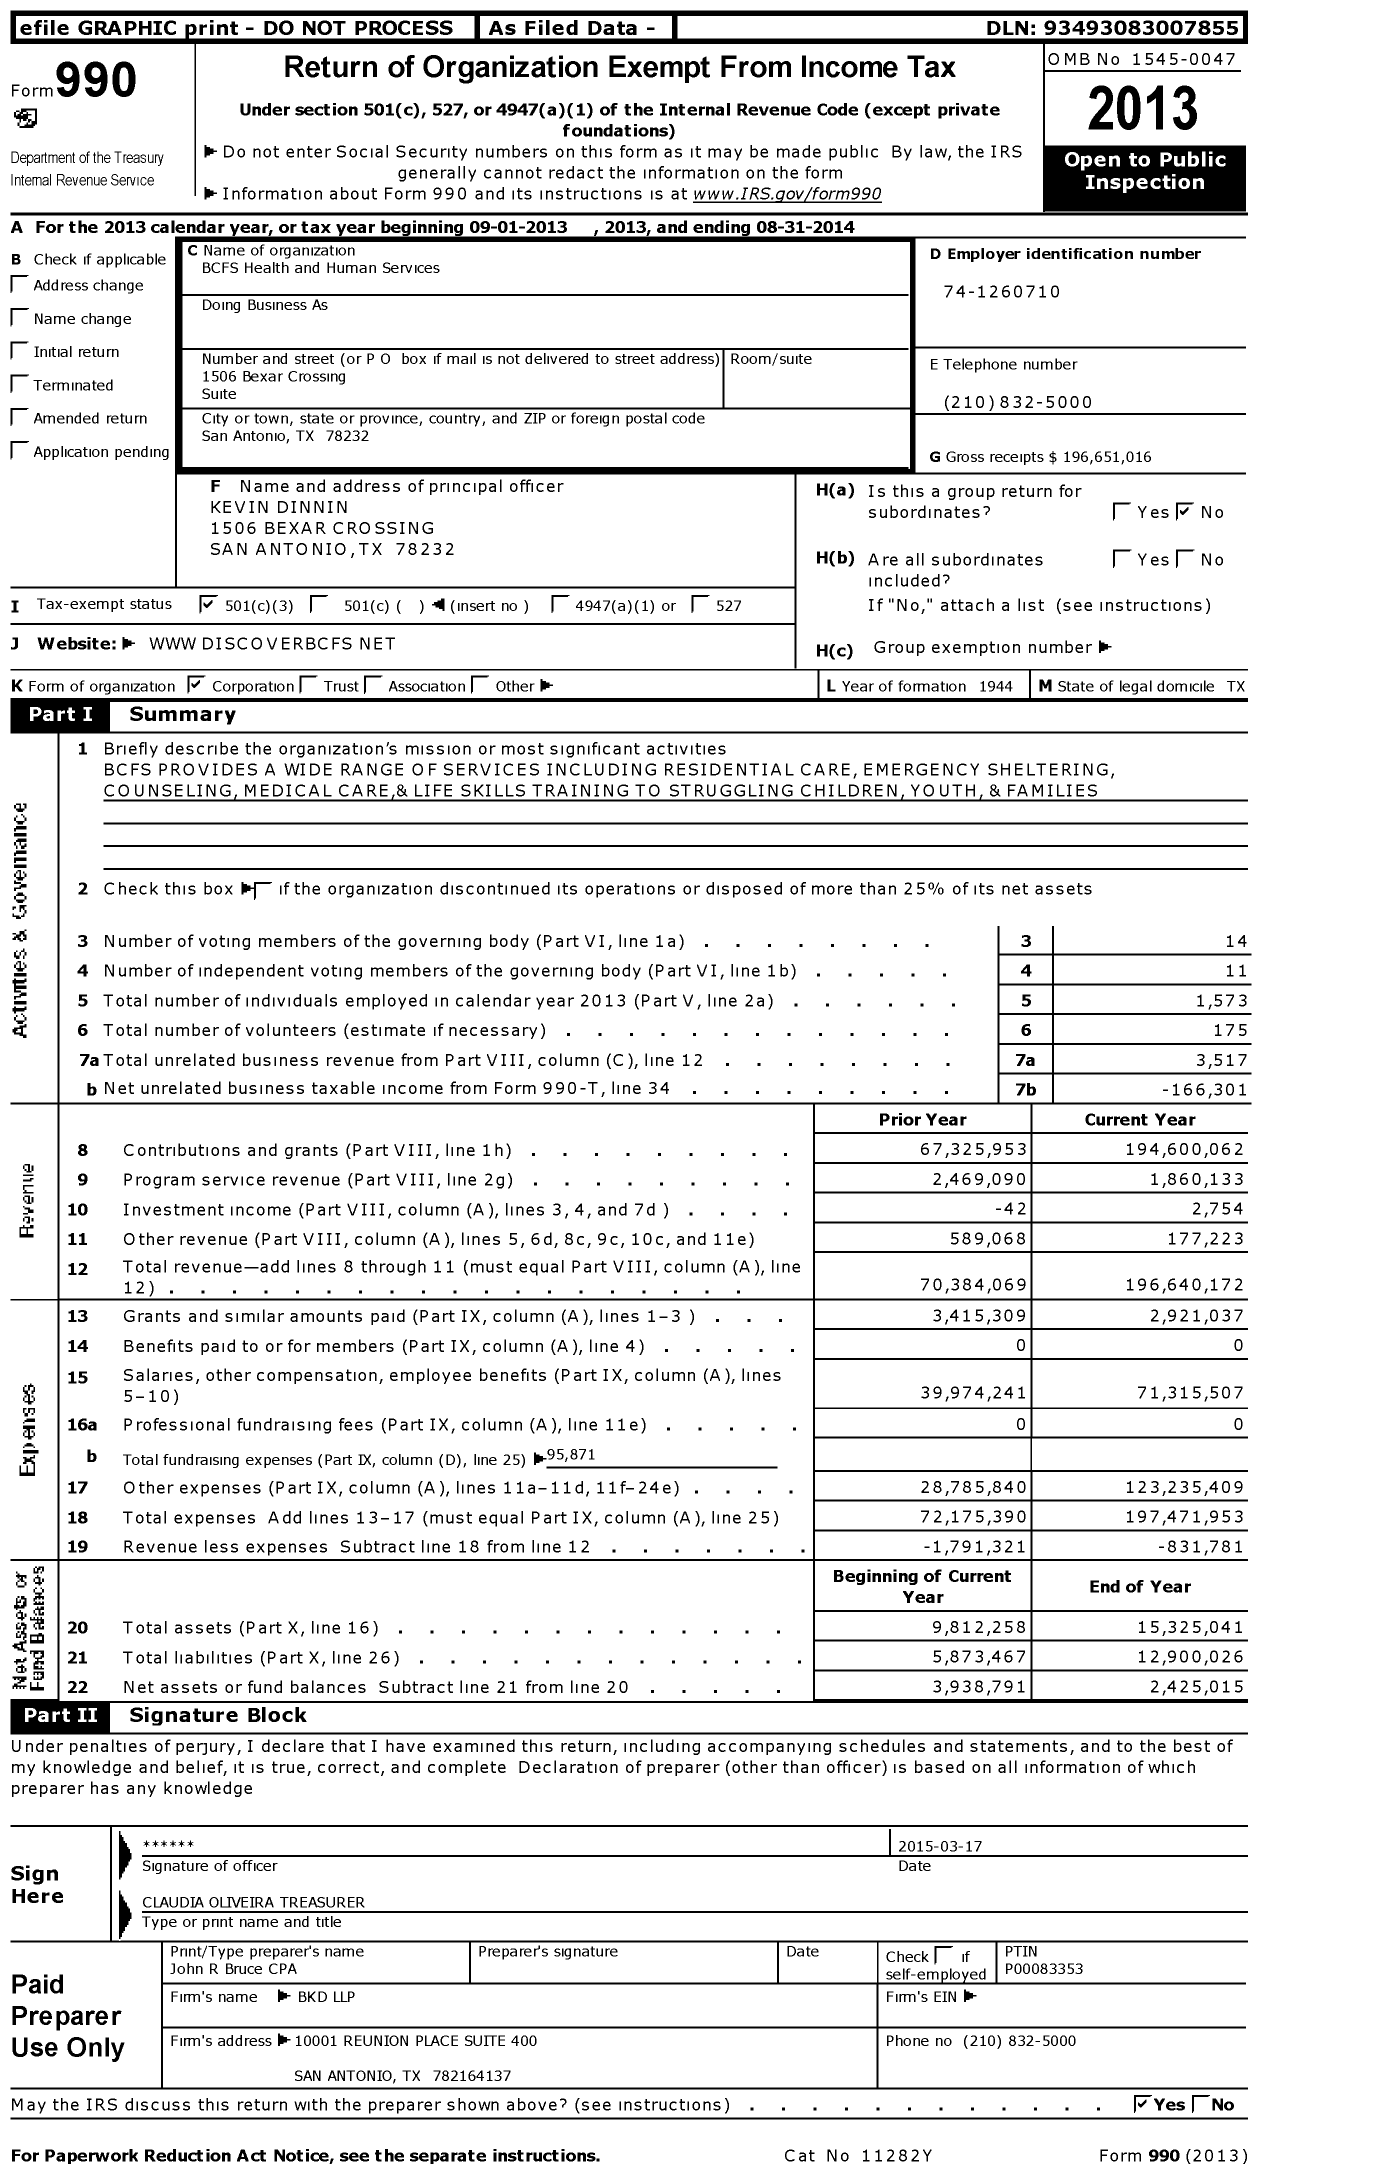 Image of first page of 2013 Form 990 for BCFS Health and Human Services (BCFS)